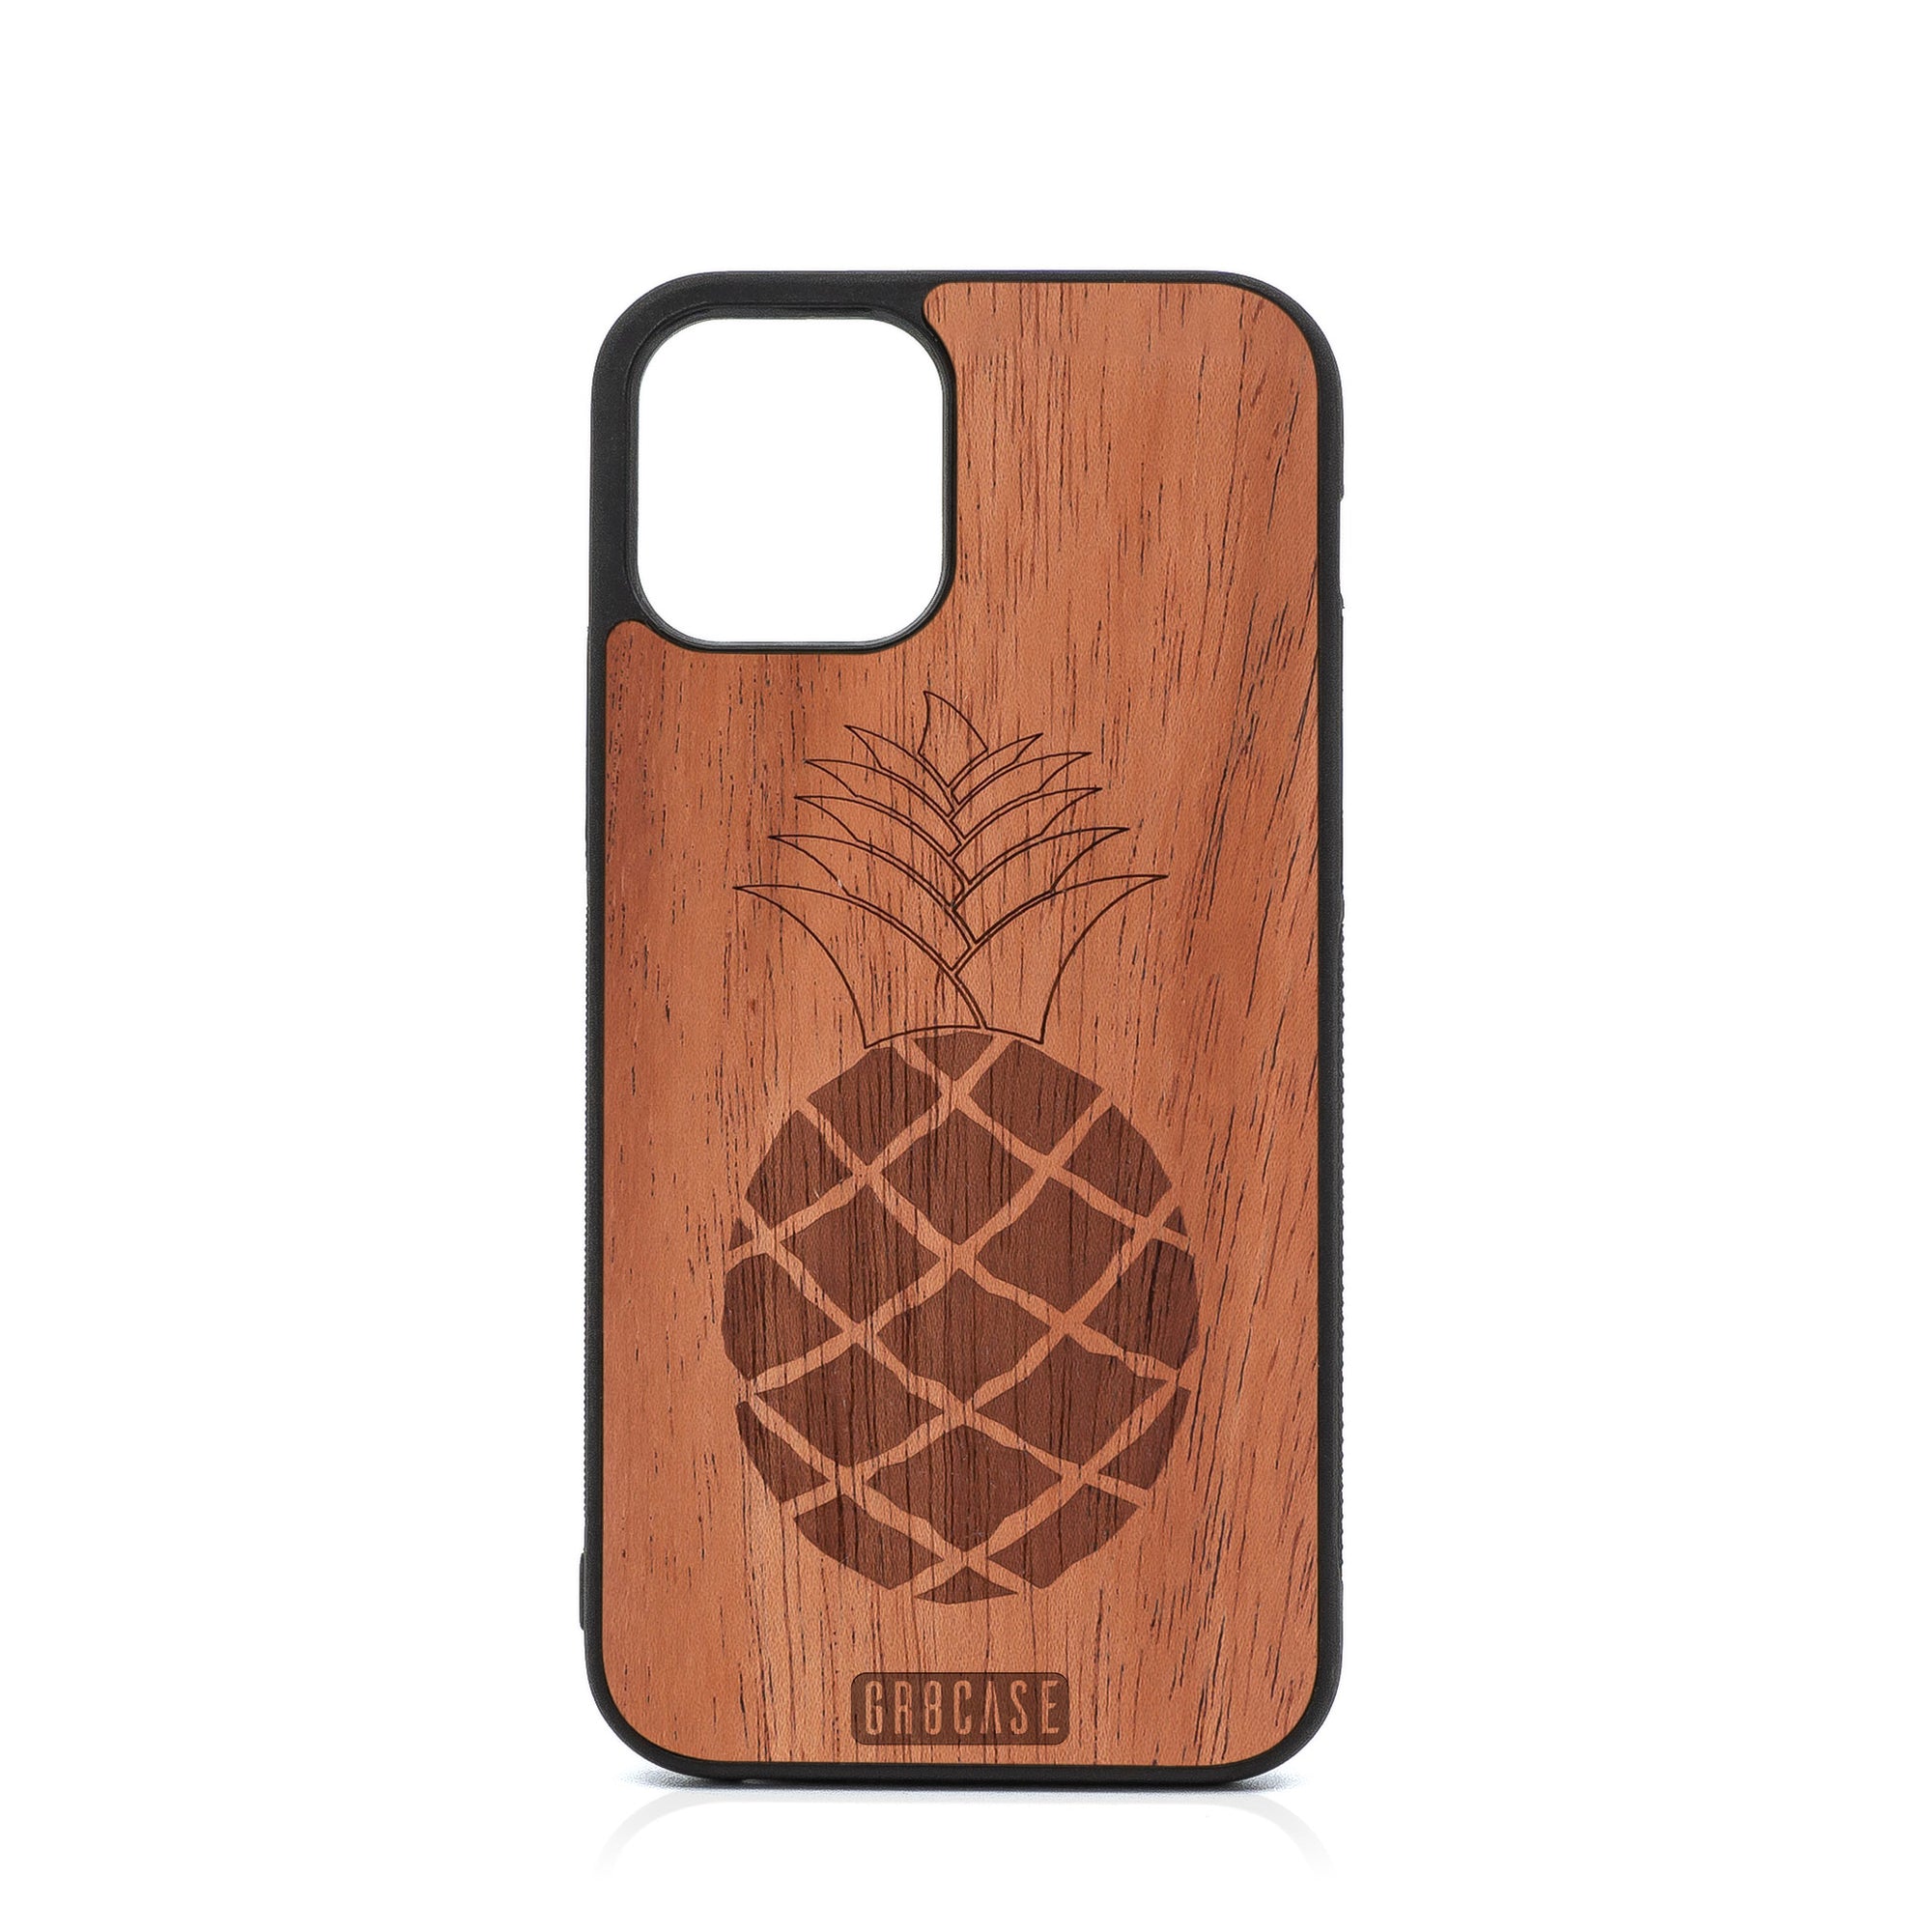 Pineapple Design Wood Case For iPhone 12